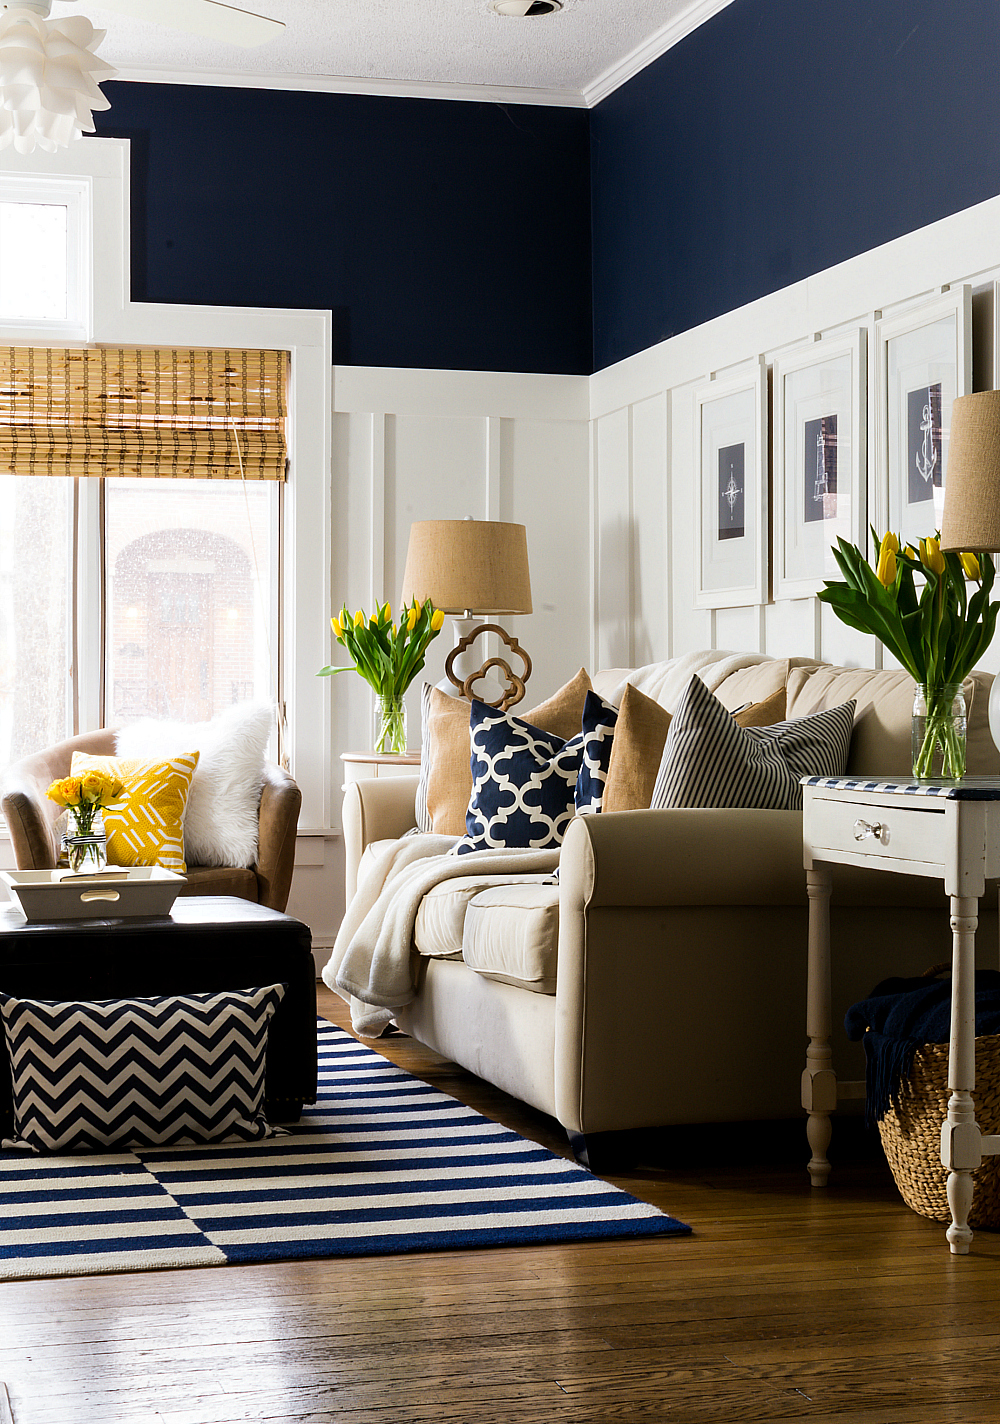 Spring Decorating Ideas in Navy and Yellow